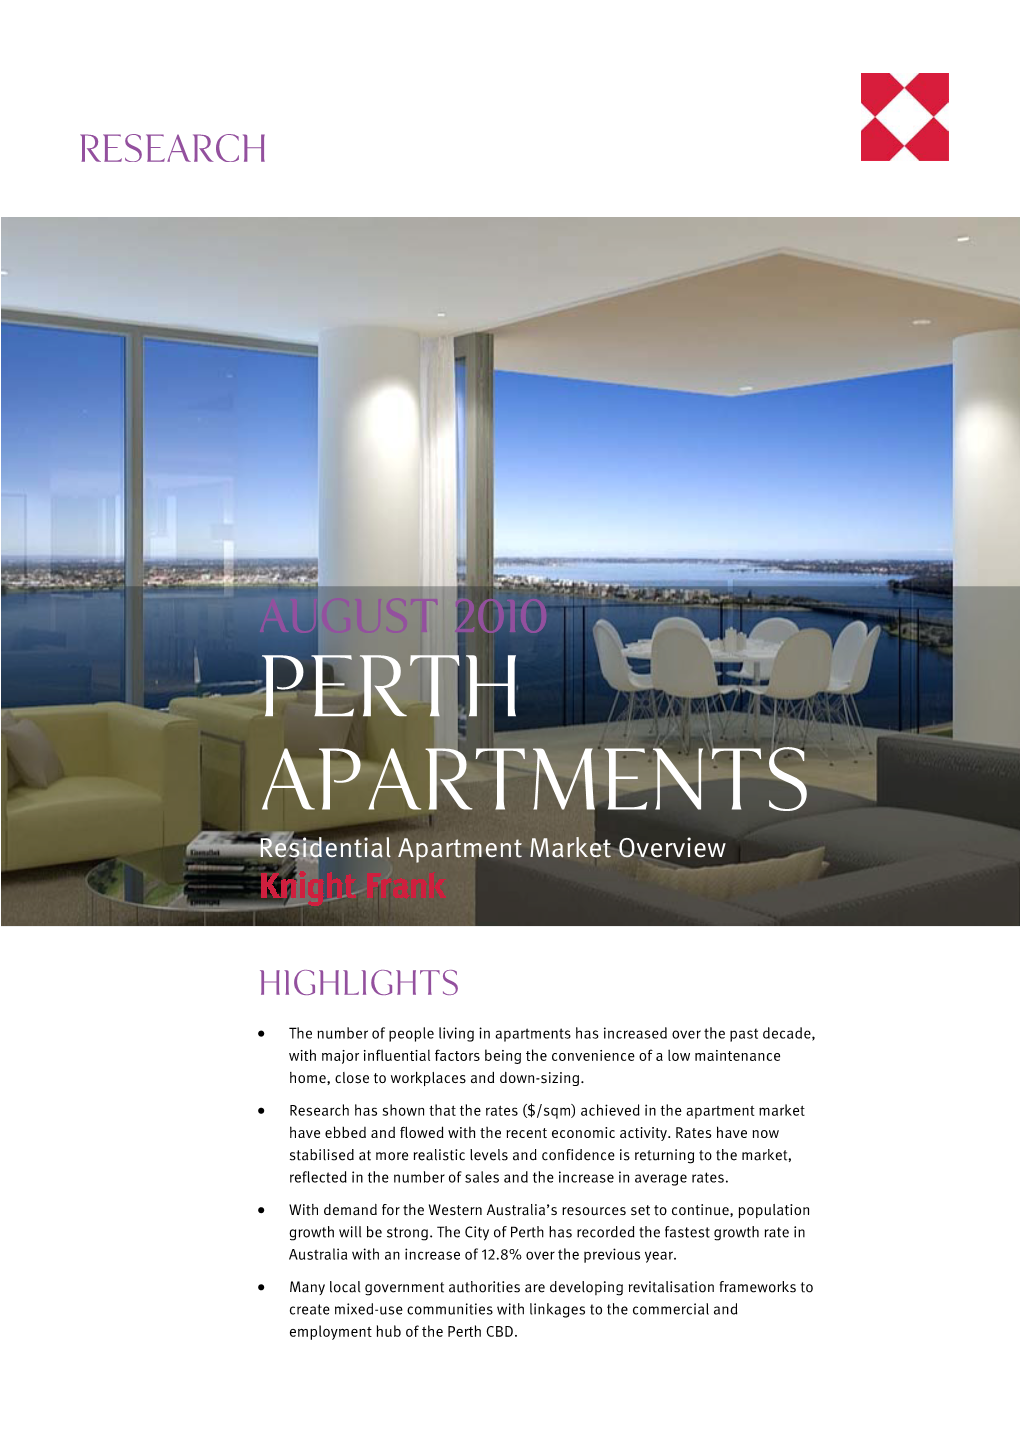 PERTH APARTMENTS Residential Apartment Market Overview